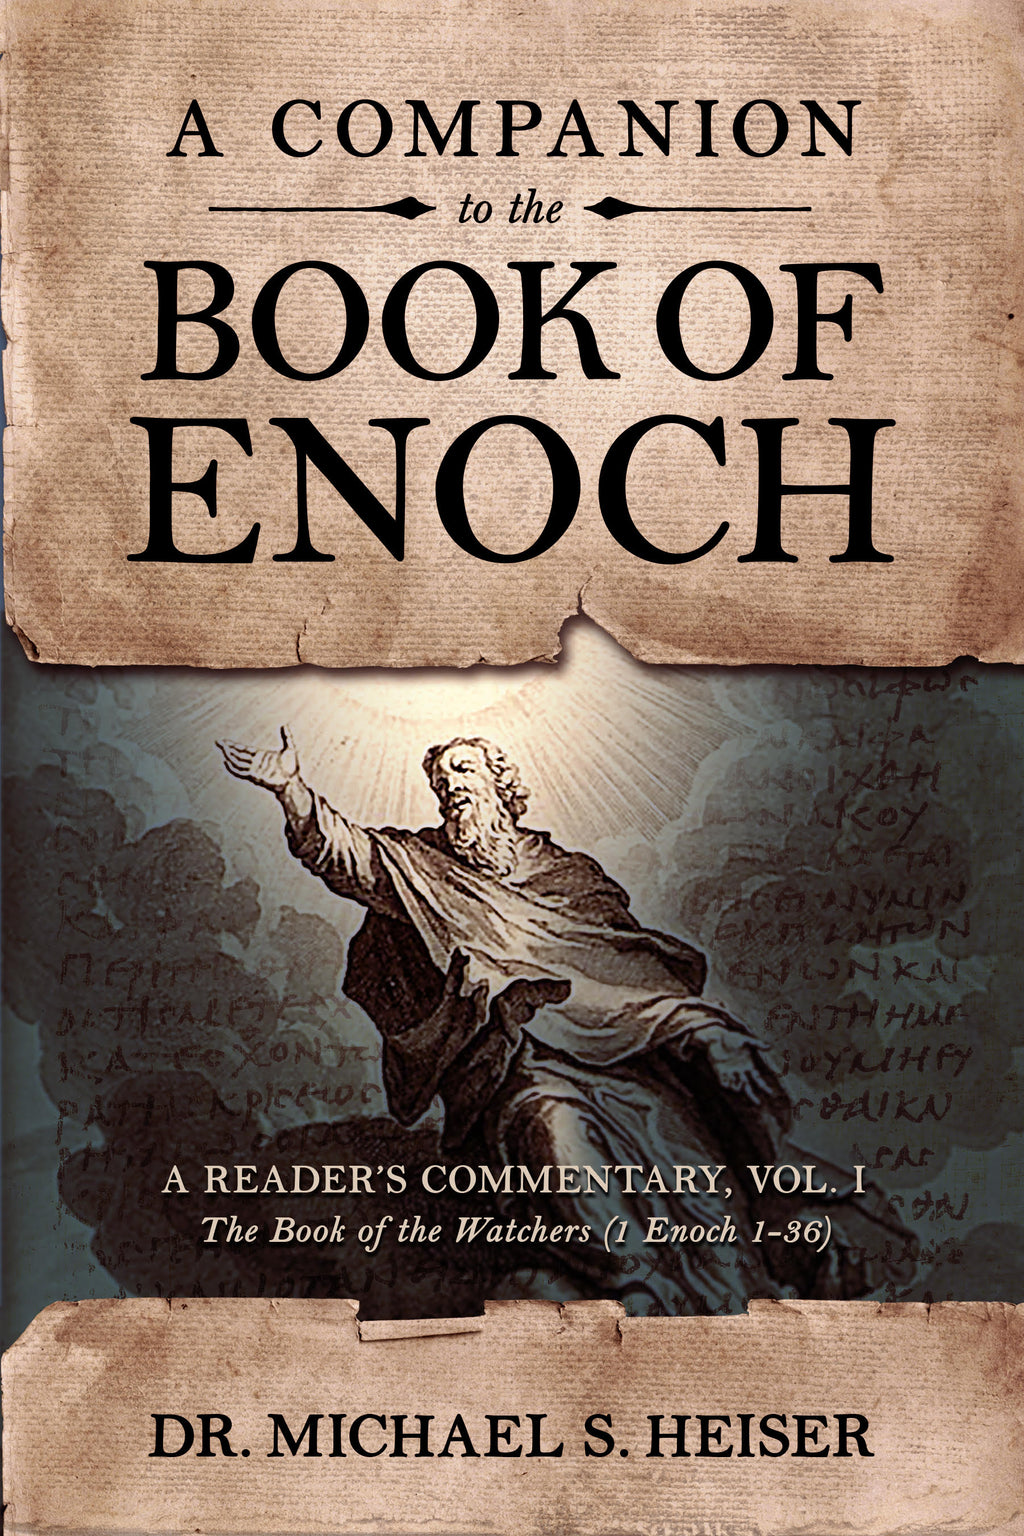 A Companion to the Book of Enoch: A Reader’s Commentary, Vol I: The Book of the Watchers (1 Enoch 1-36)